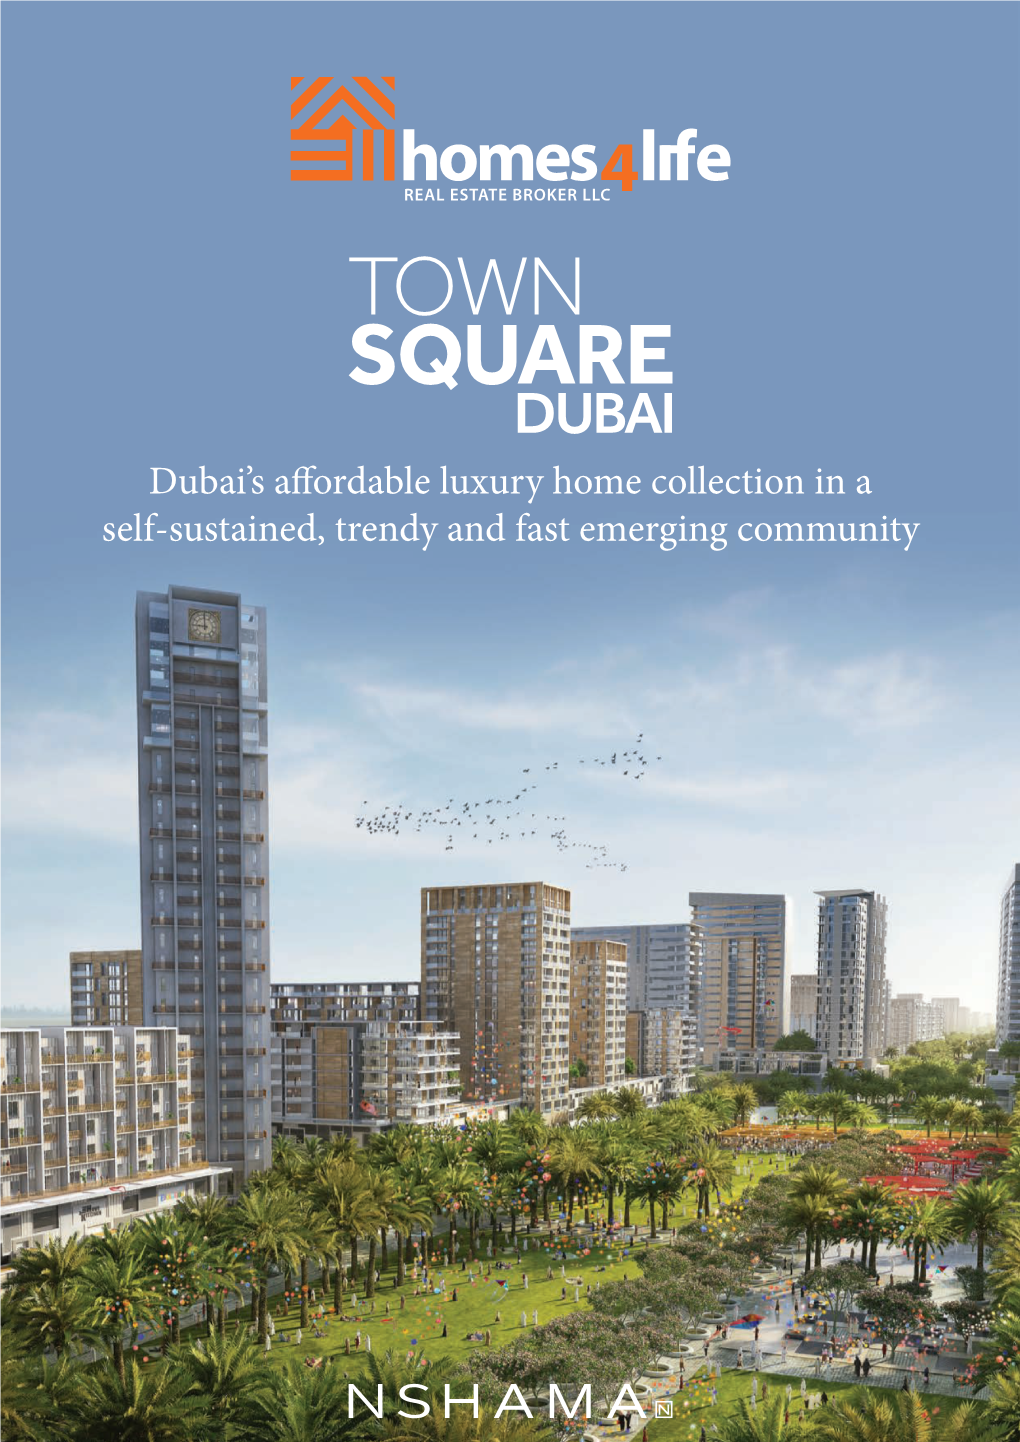 Dubai's Affordable Luxury Home Collection in a Self-Sustained, Trendy